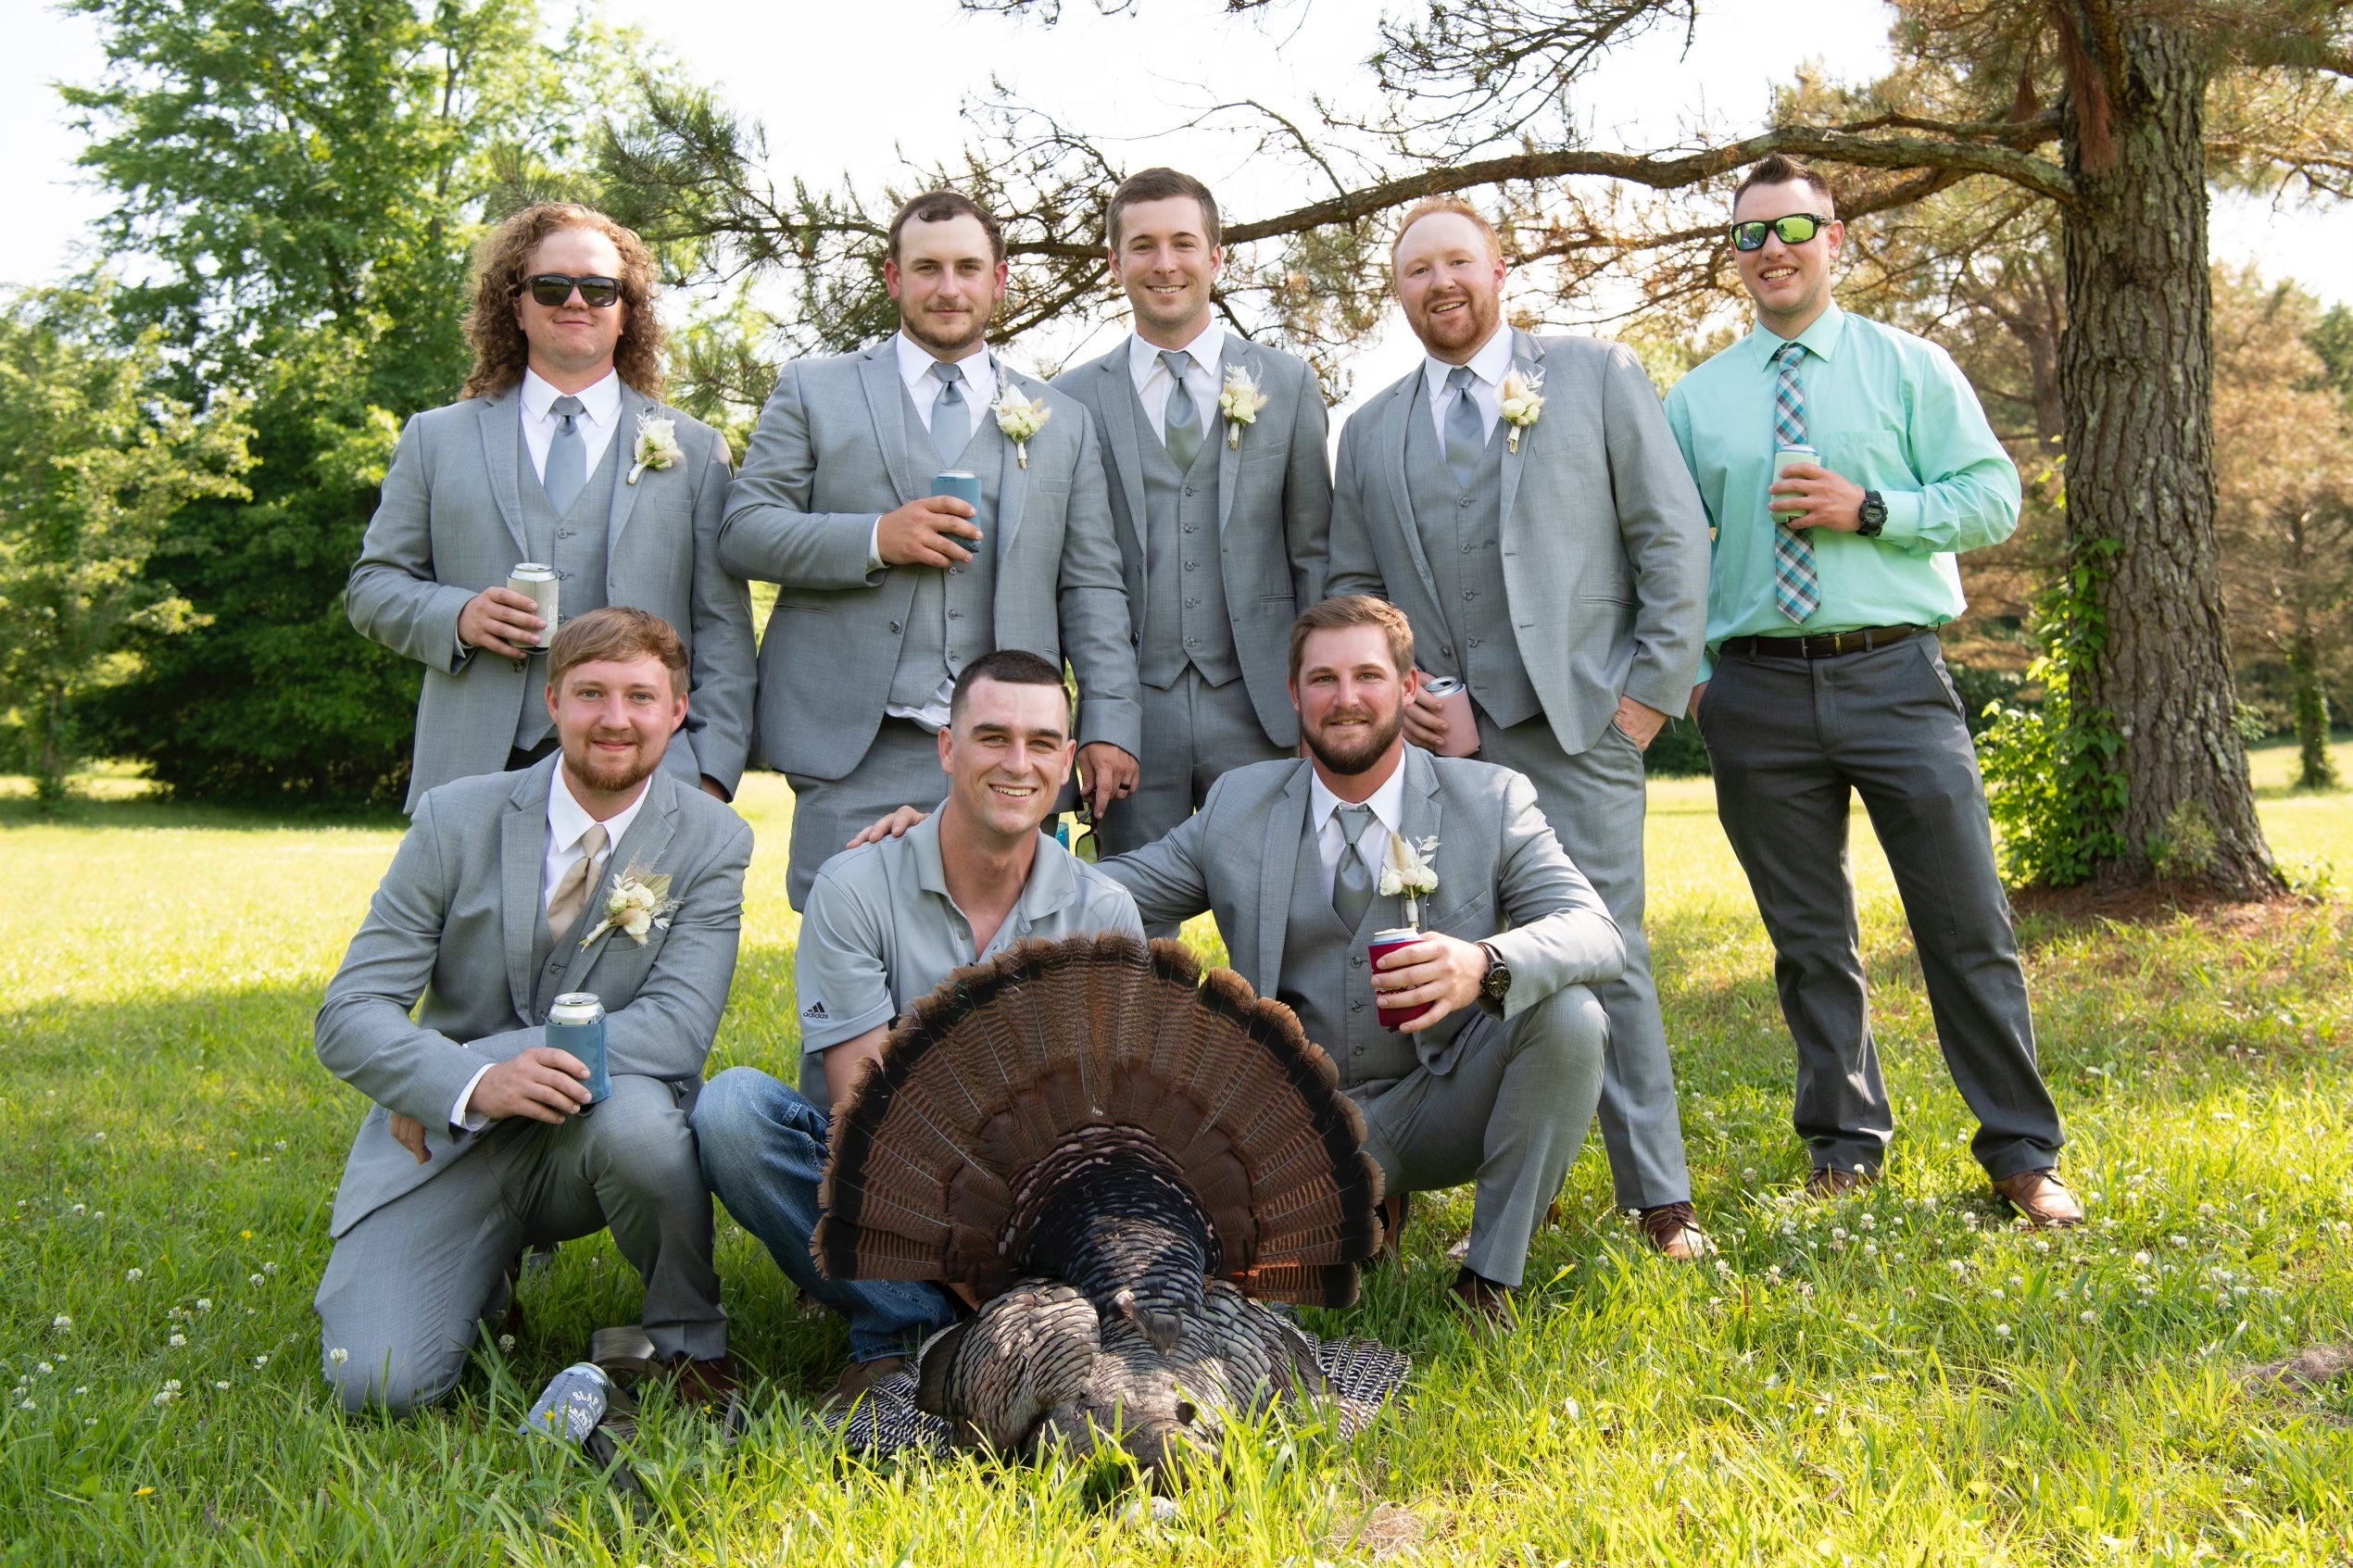 Groomsmen in suits pose with turkey